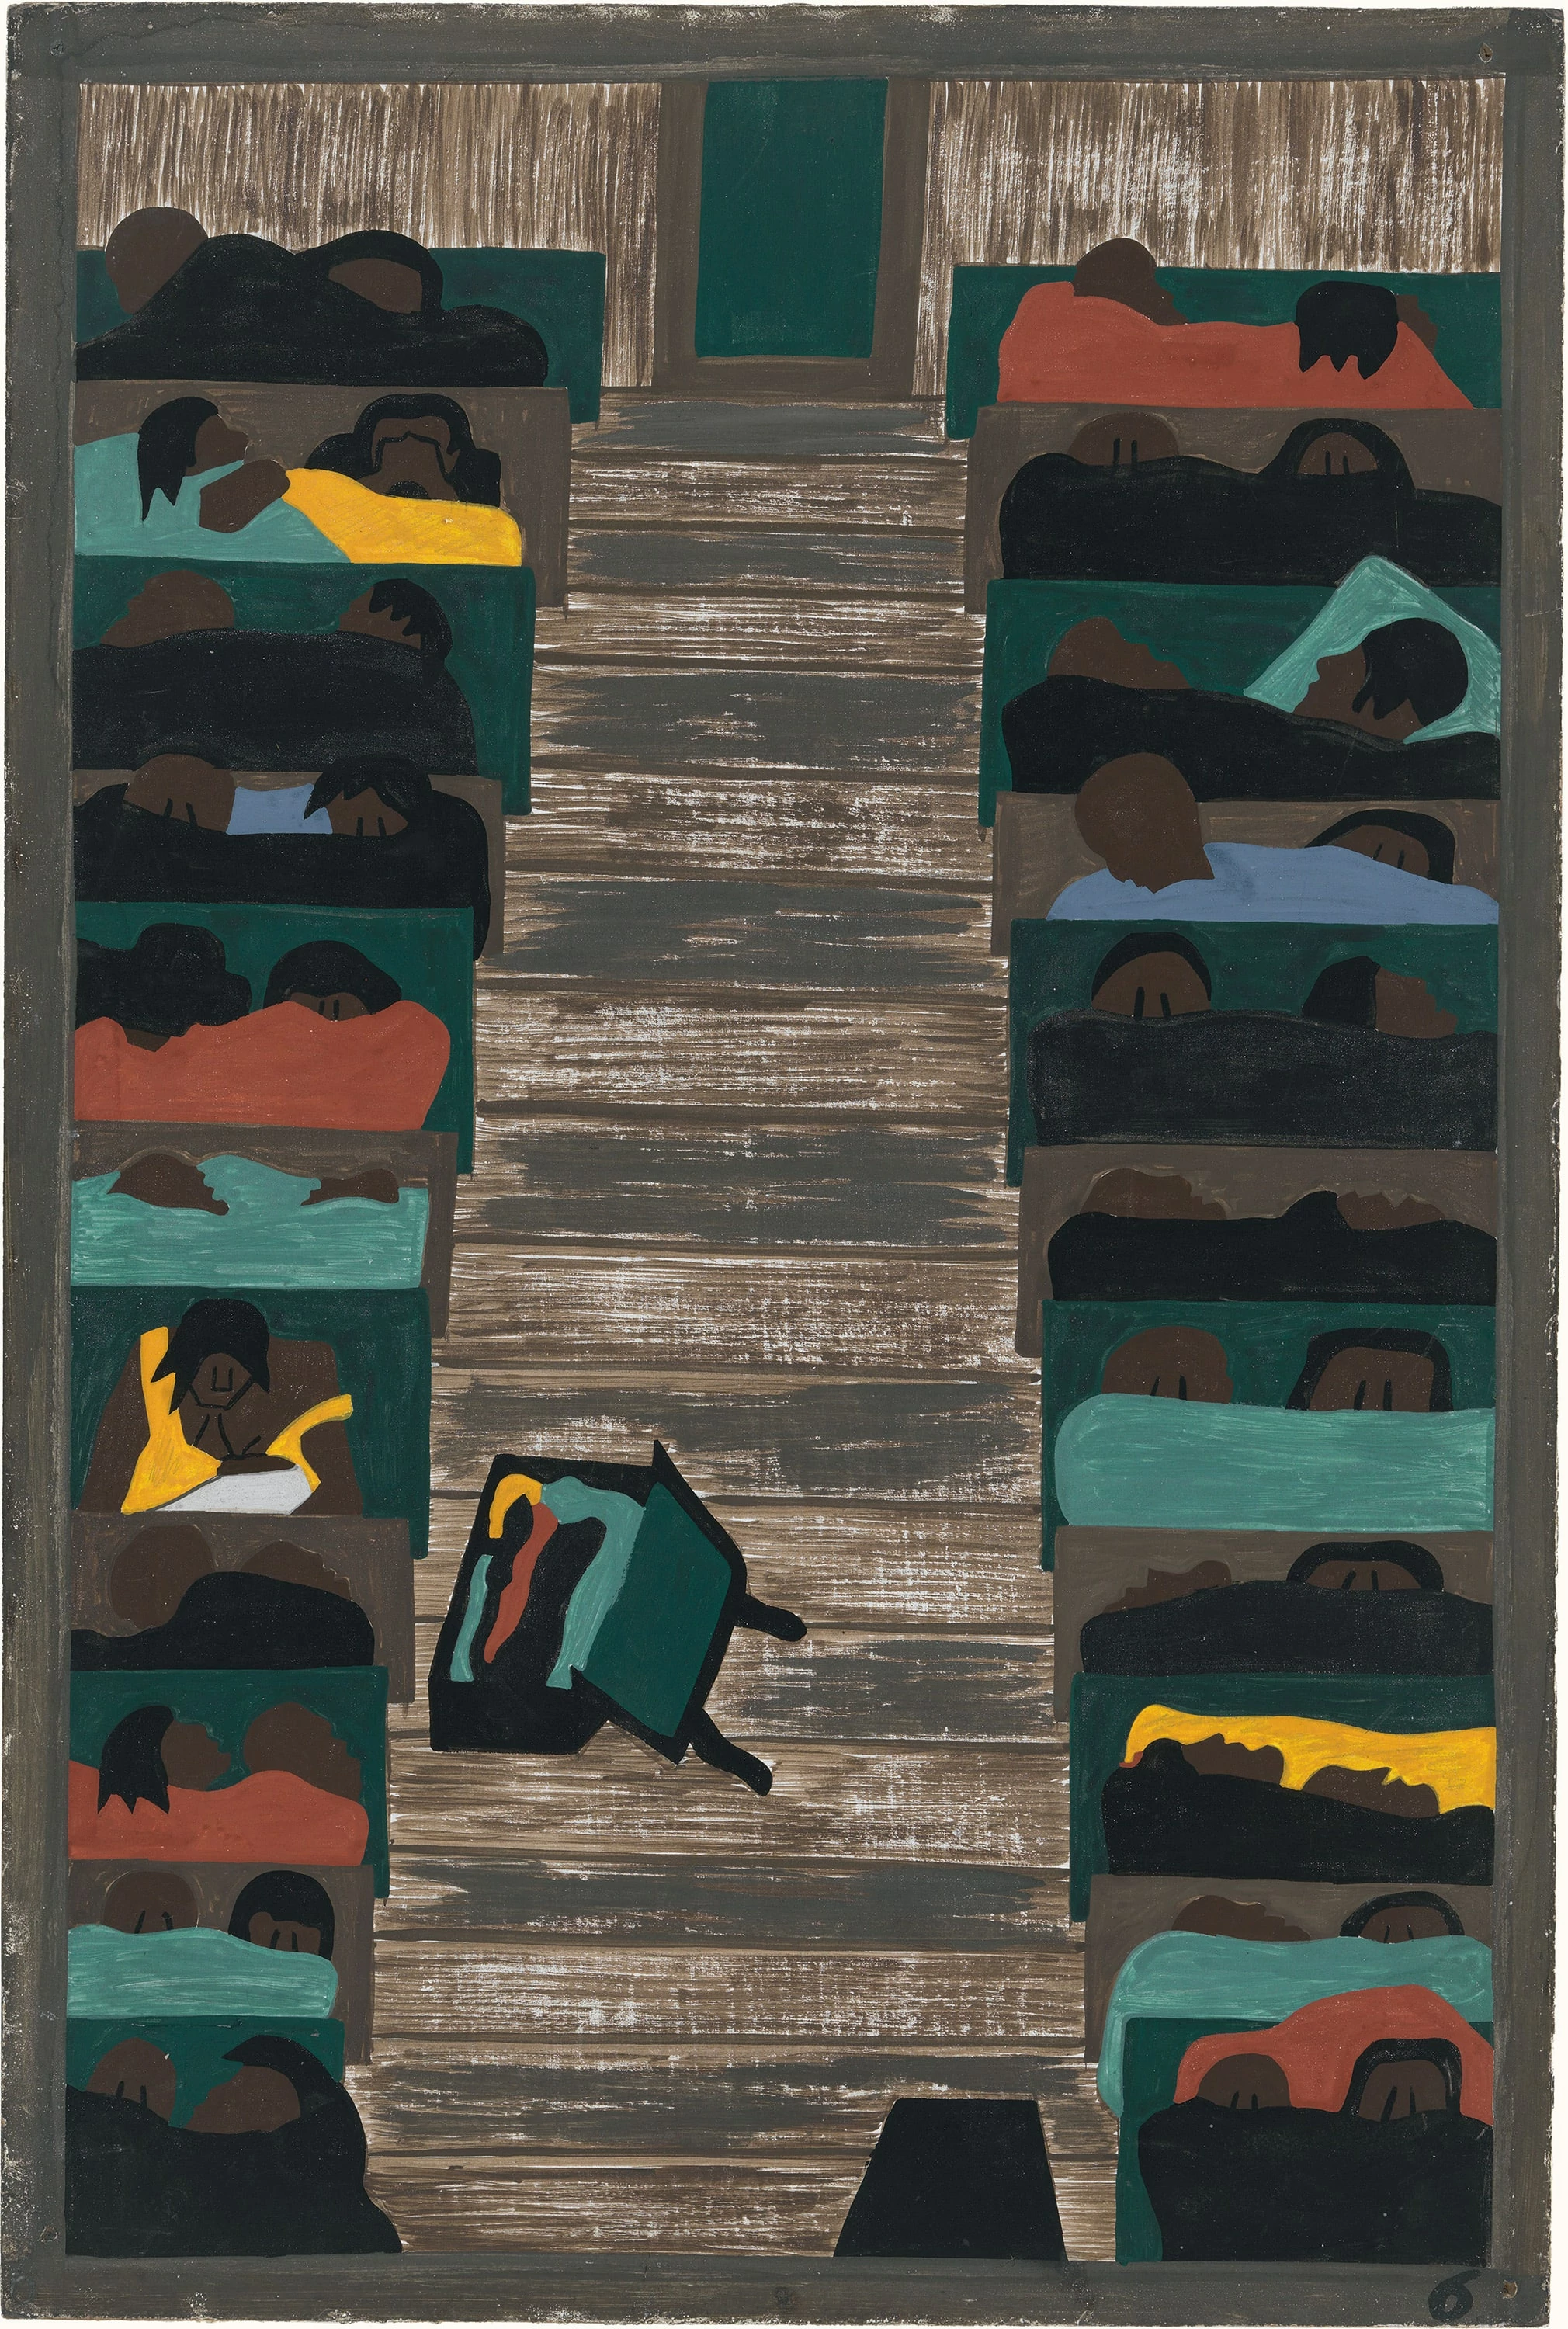 Migration Series No.6: The trains were crowded with migrants, Jacob Lawrence